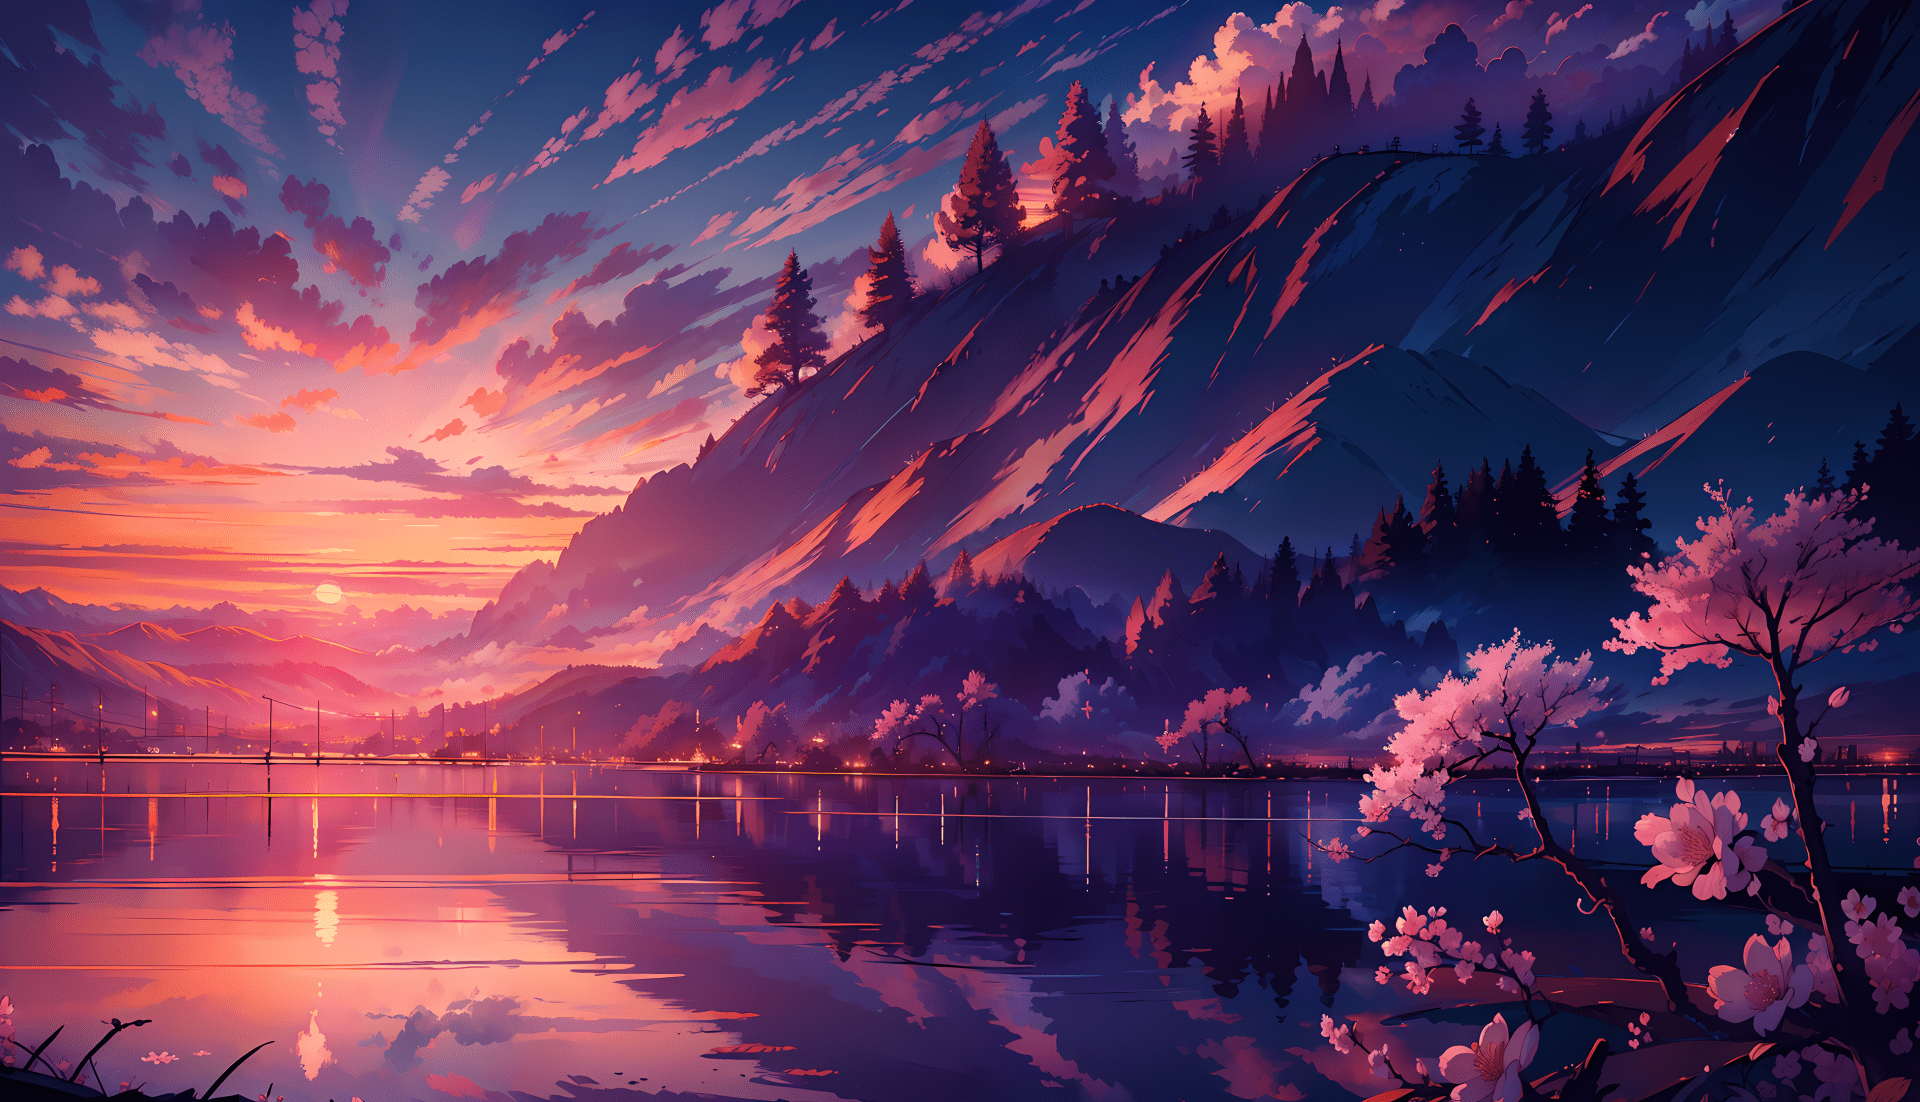 Anime Scenery 8K Wallpapers - Top Free Anime Scenery 8K Backgrounds ...